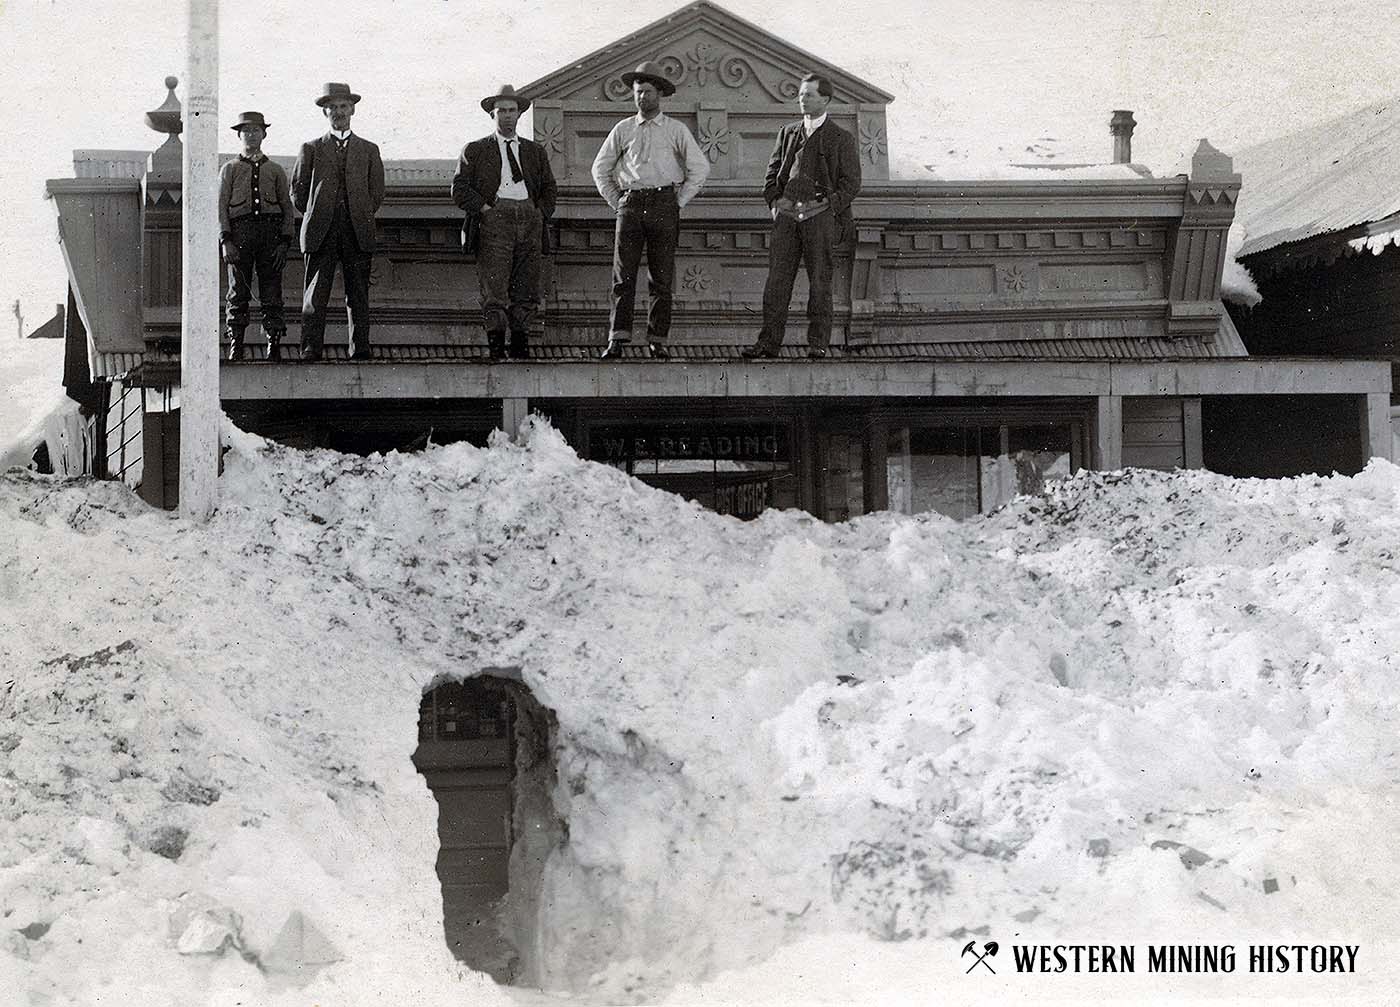 Reading Store snowed in at Bodie, California 1911